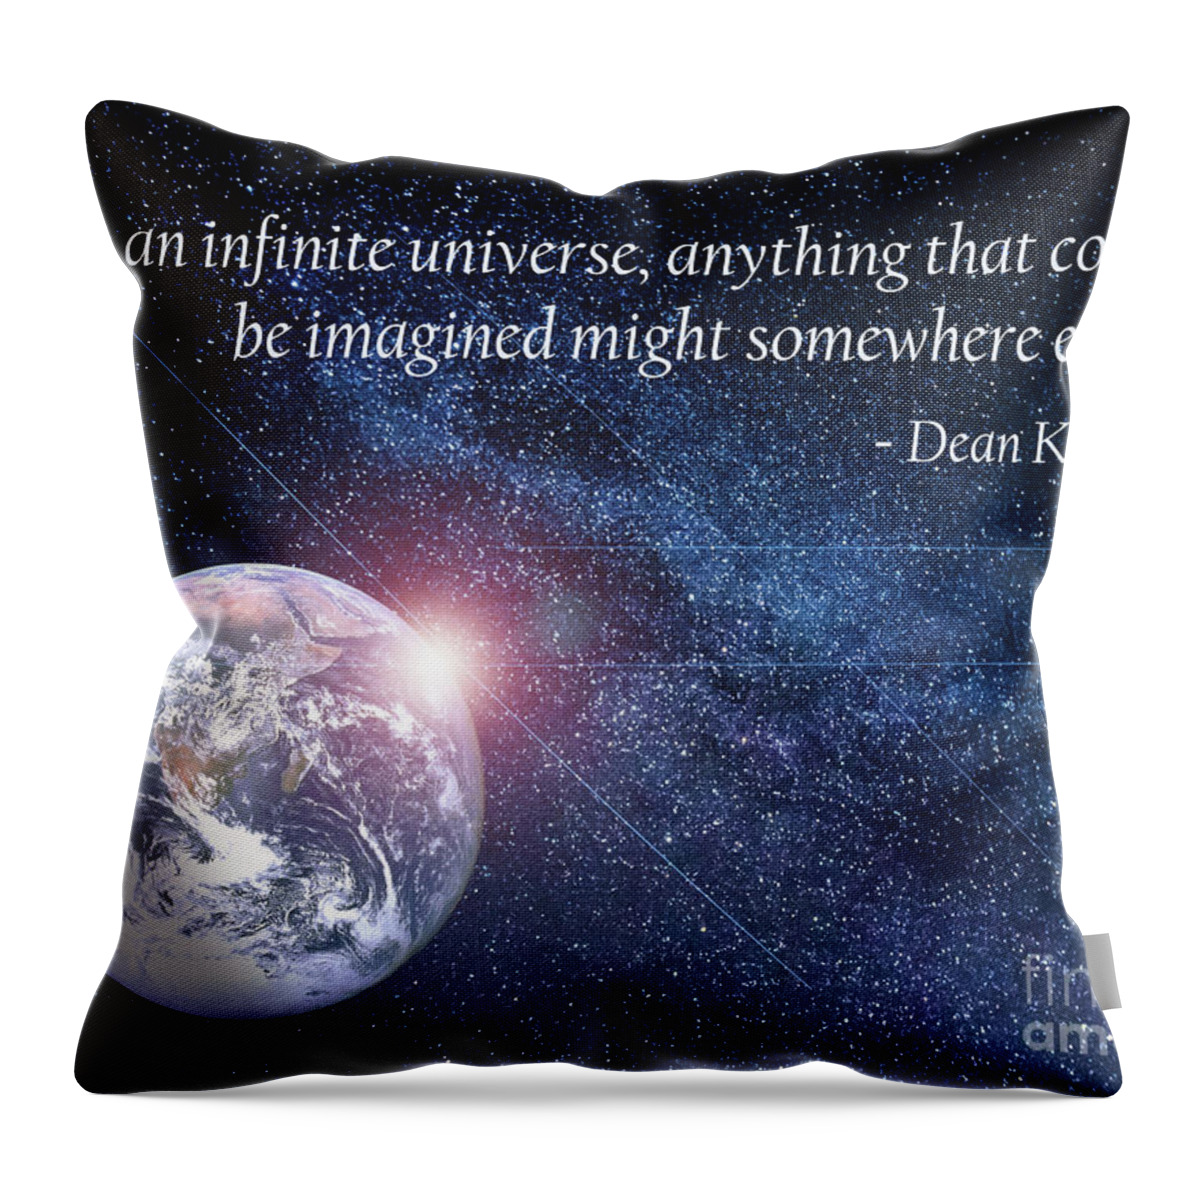 Earth; Planet; Universe; Stars; Sunrise; Inspiration; Imagine; Infinite; Quote; Koontz; Throw Pillow featuring the digital art Infinite Universe by Tina Uihlein